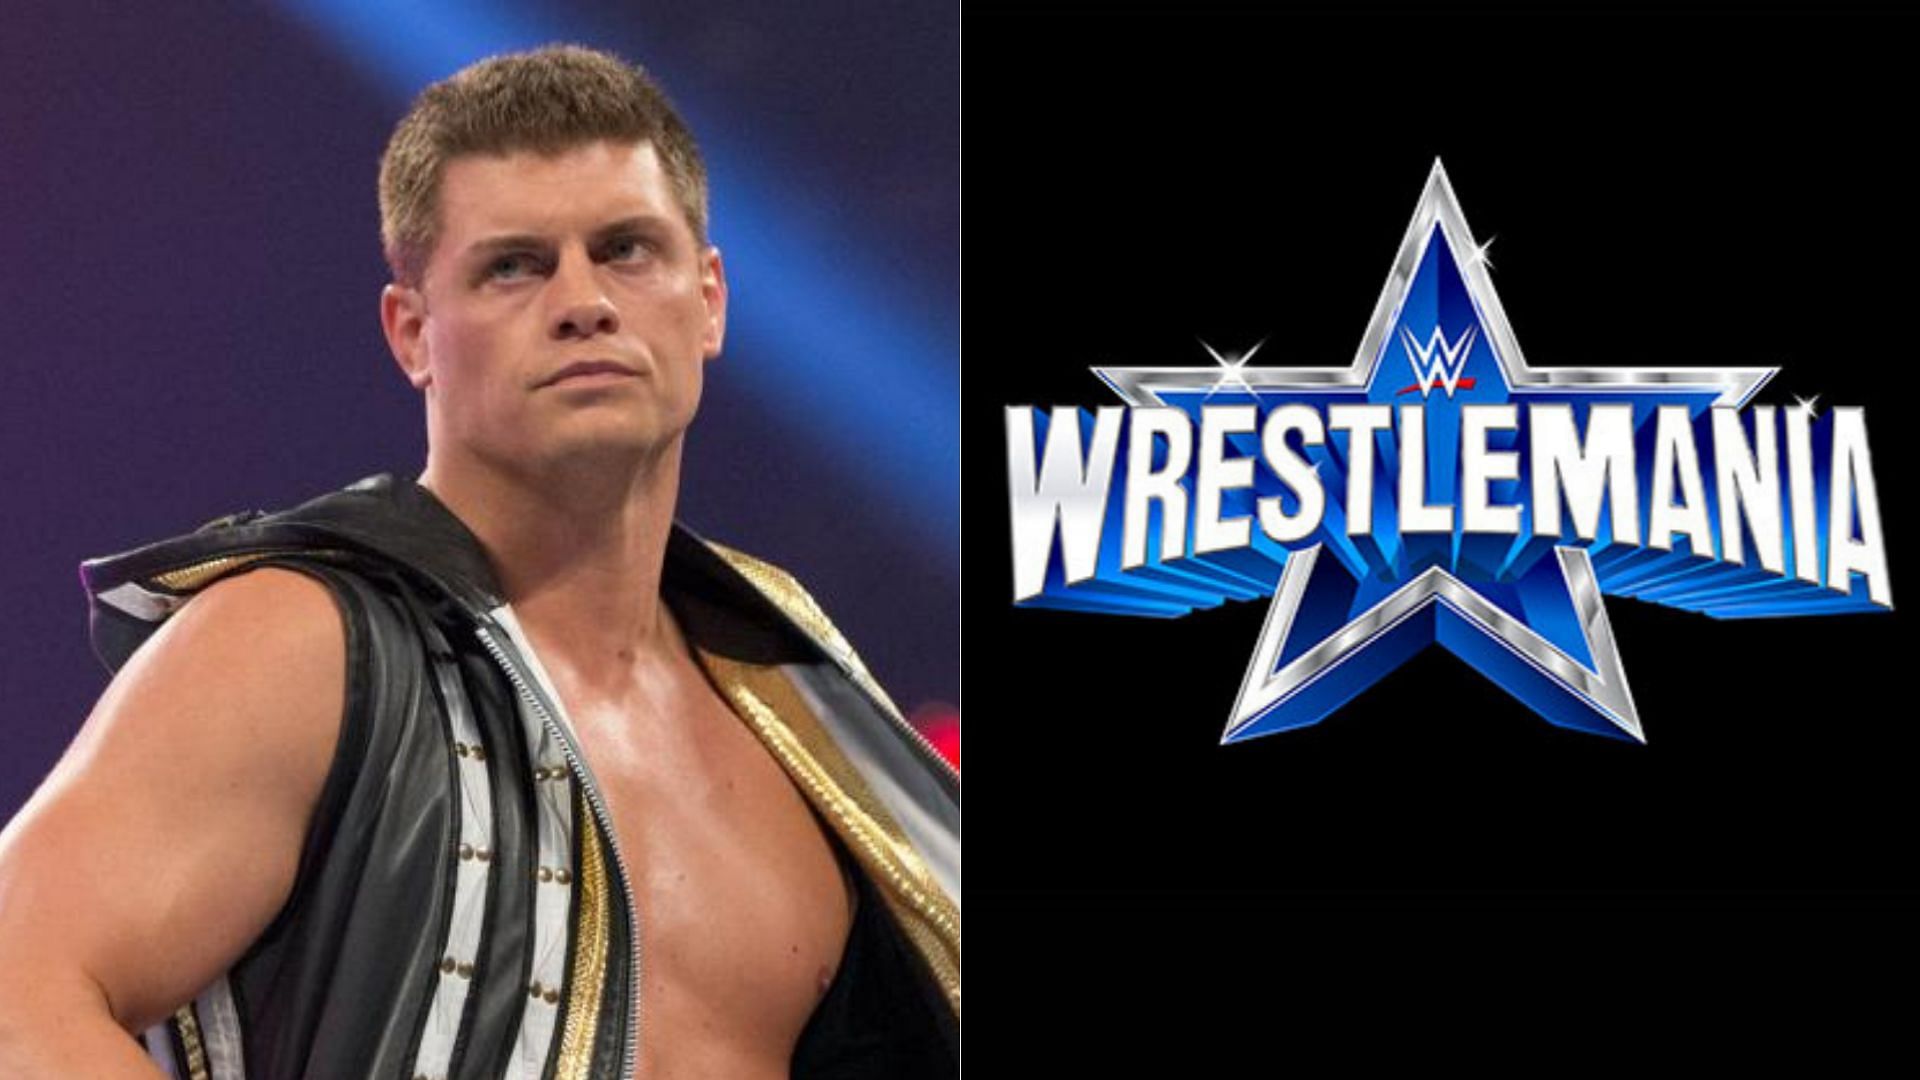 Cody Rhodes has not competed in a WrestleMania match since 2016